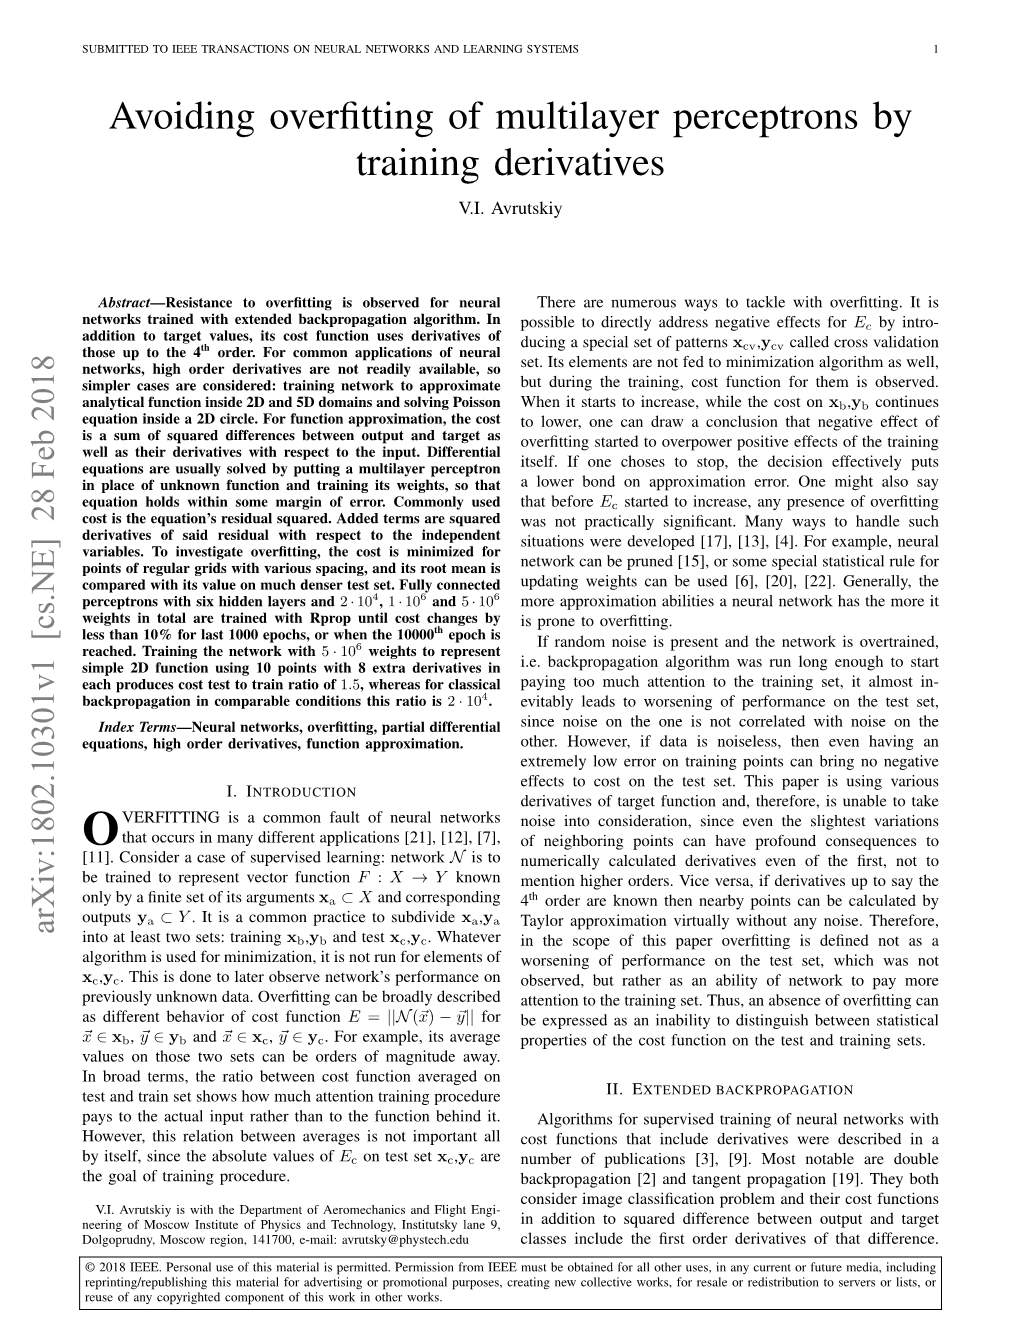 Avoiding Overfitting of Multilayer Perceptrons by Training Derivatives